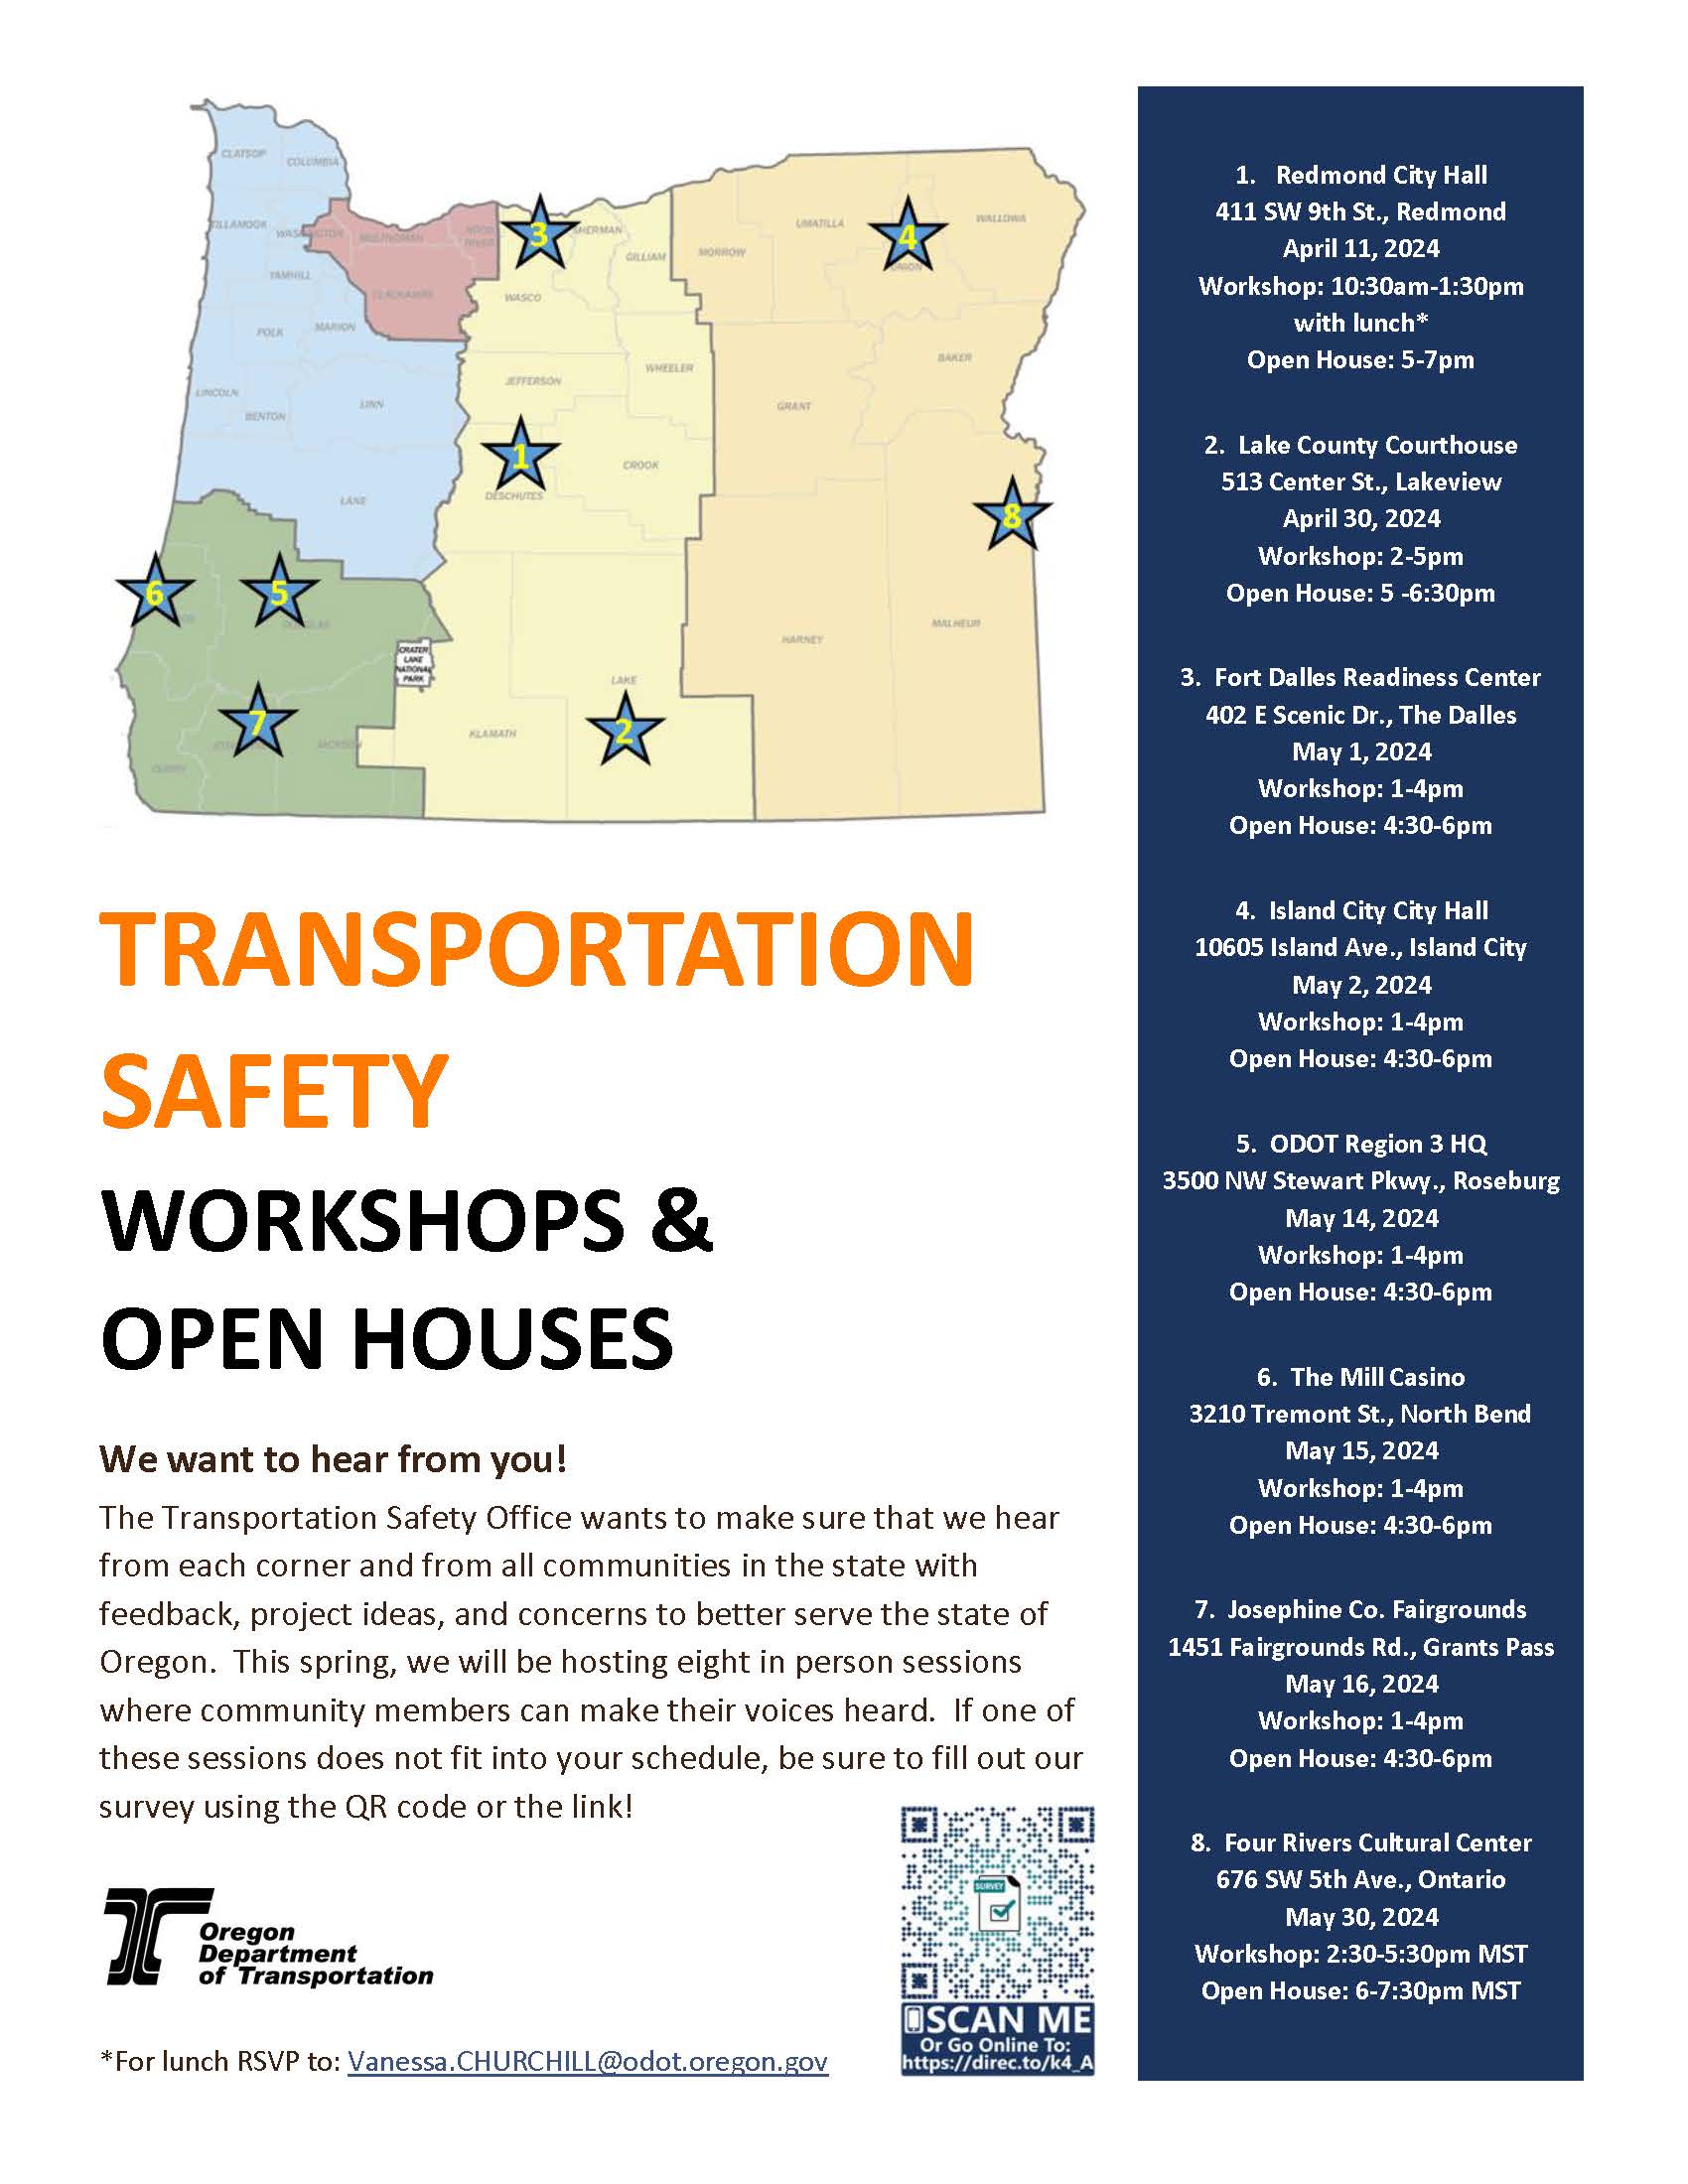 Transportation Safety Workshops and Open House Events